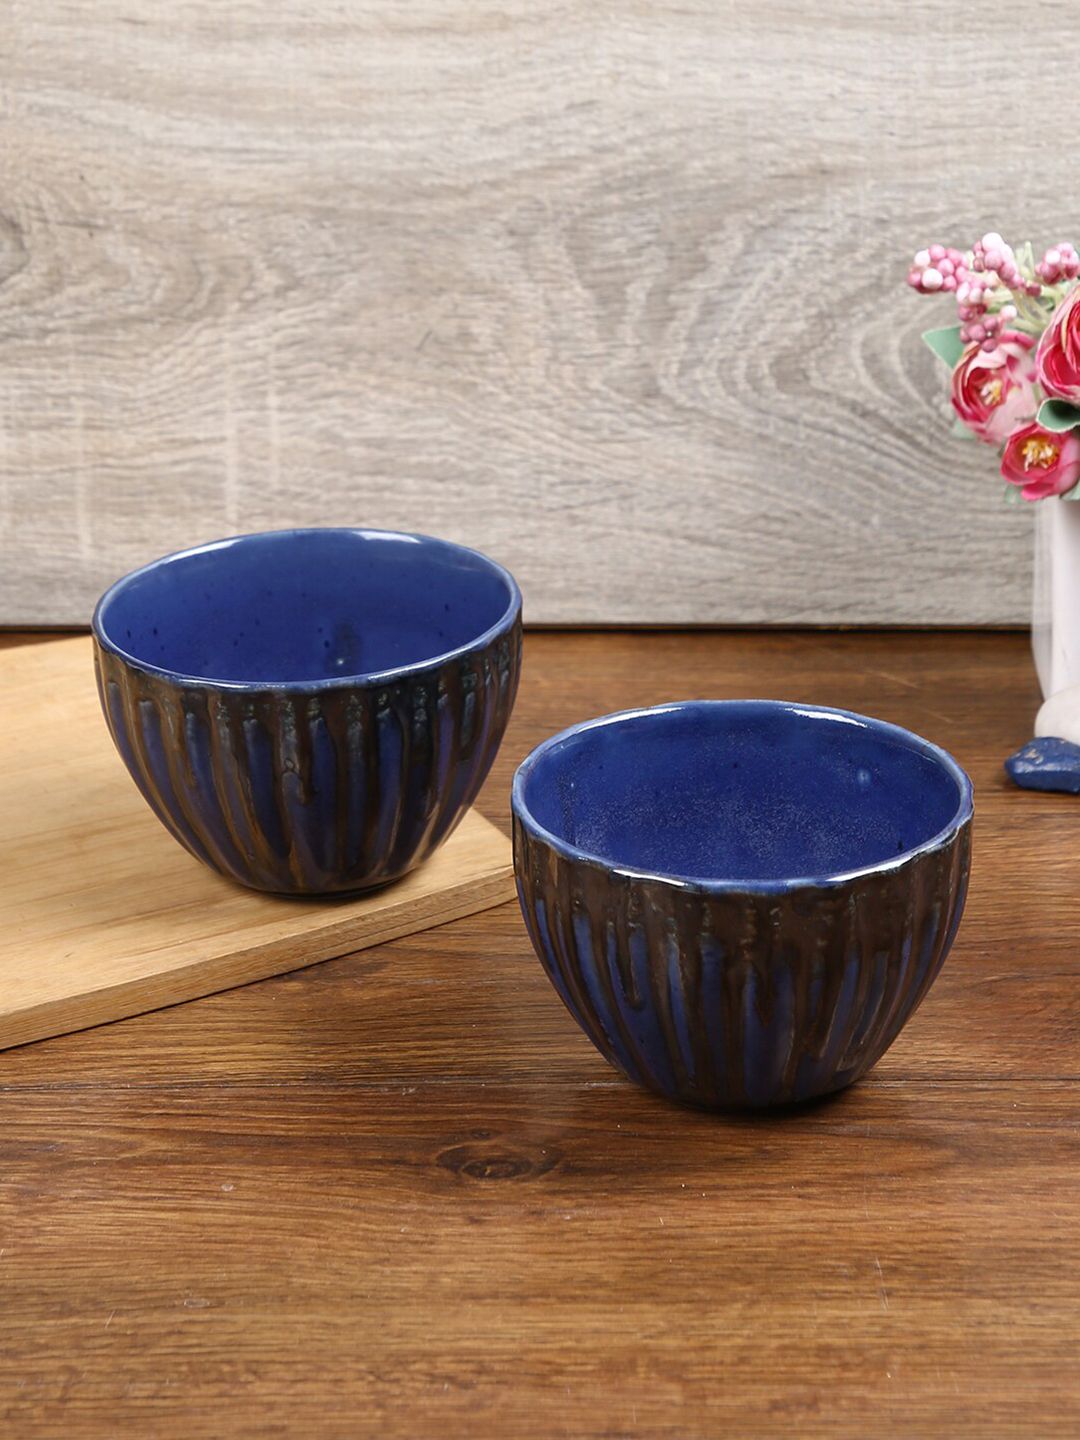 Aapno Rajasthan Blue & Grey 2 Pieces Textured Ceramic Glossy Bowls Price in India